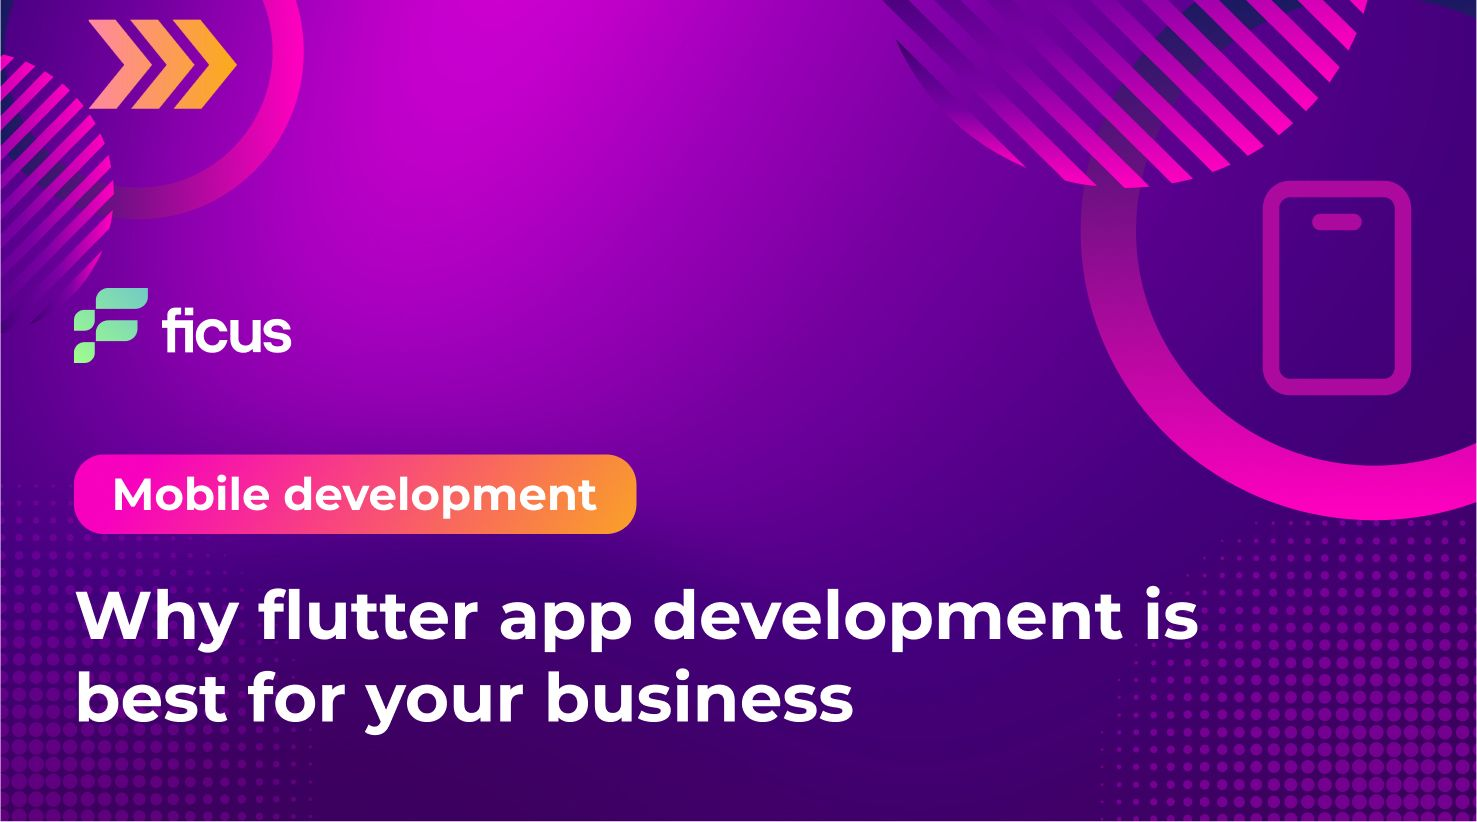 Why flutter app development is best for your business